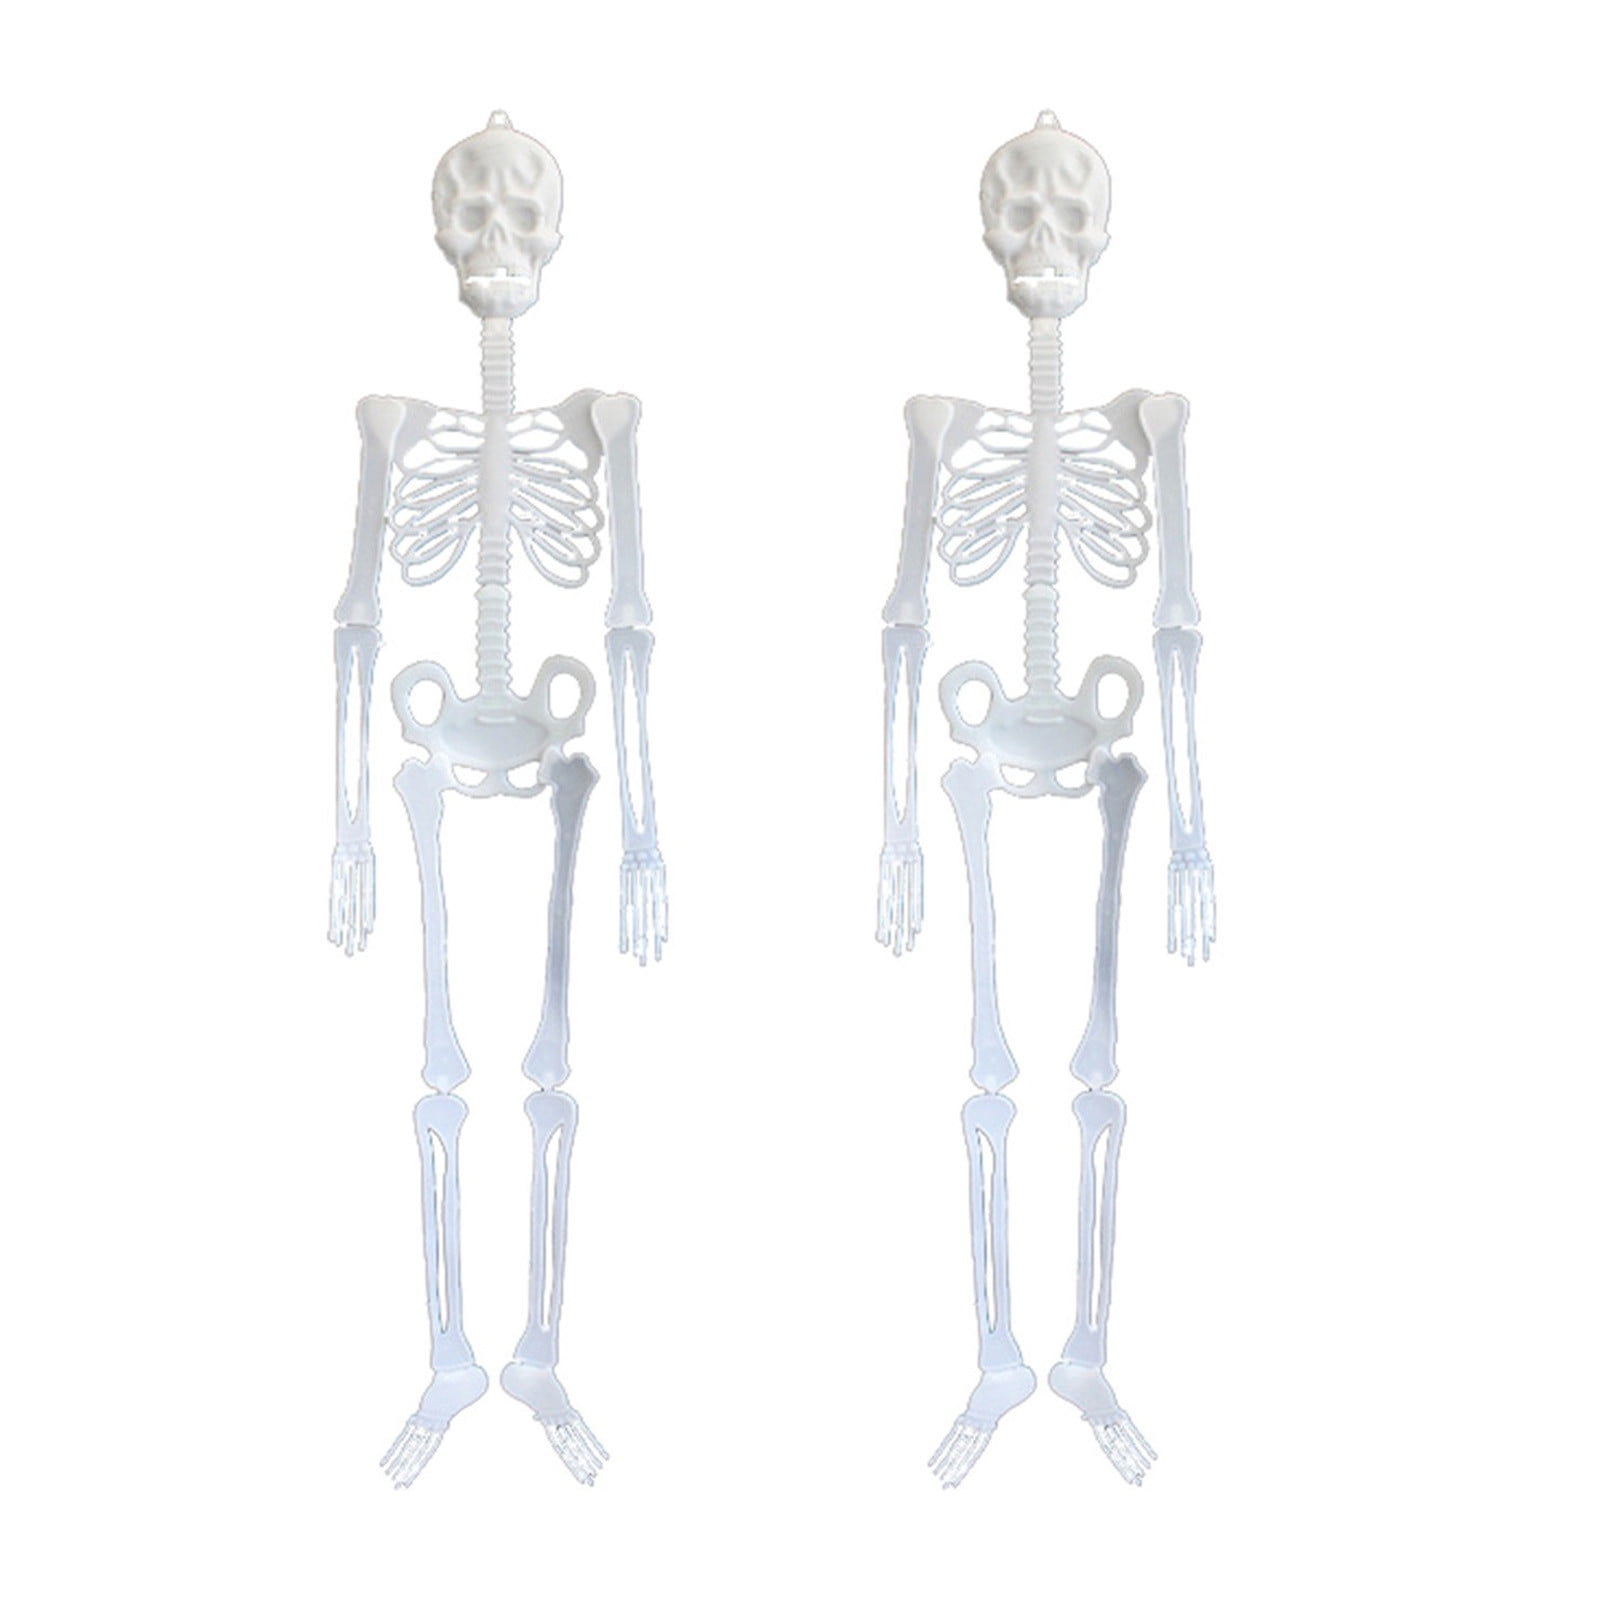 Details about   90cm Luminous Skull Skeleton Halloween Party  Scary Props Outdoor Hanging Decor 